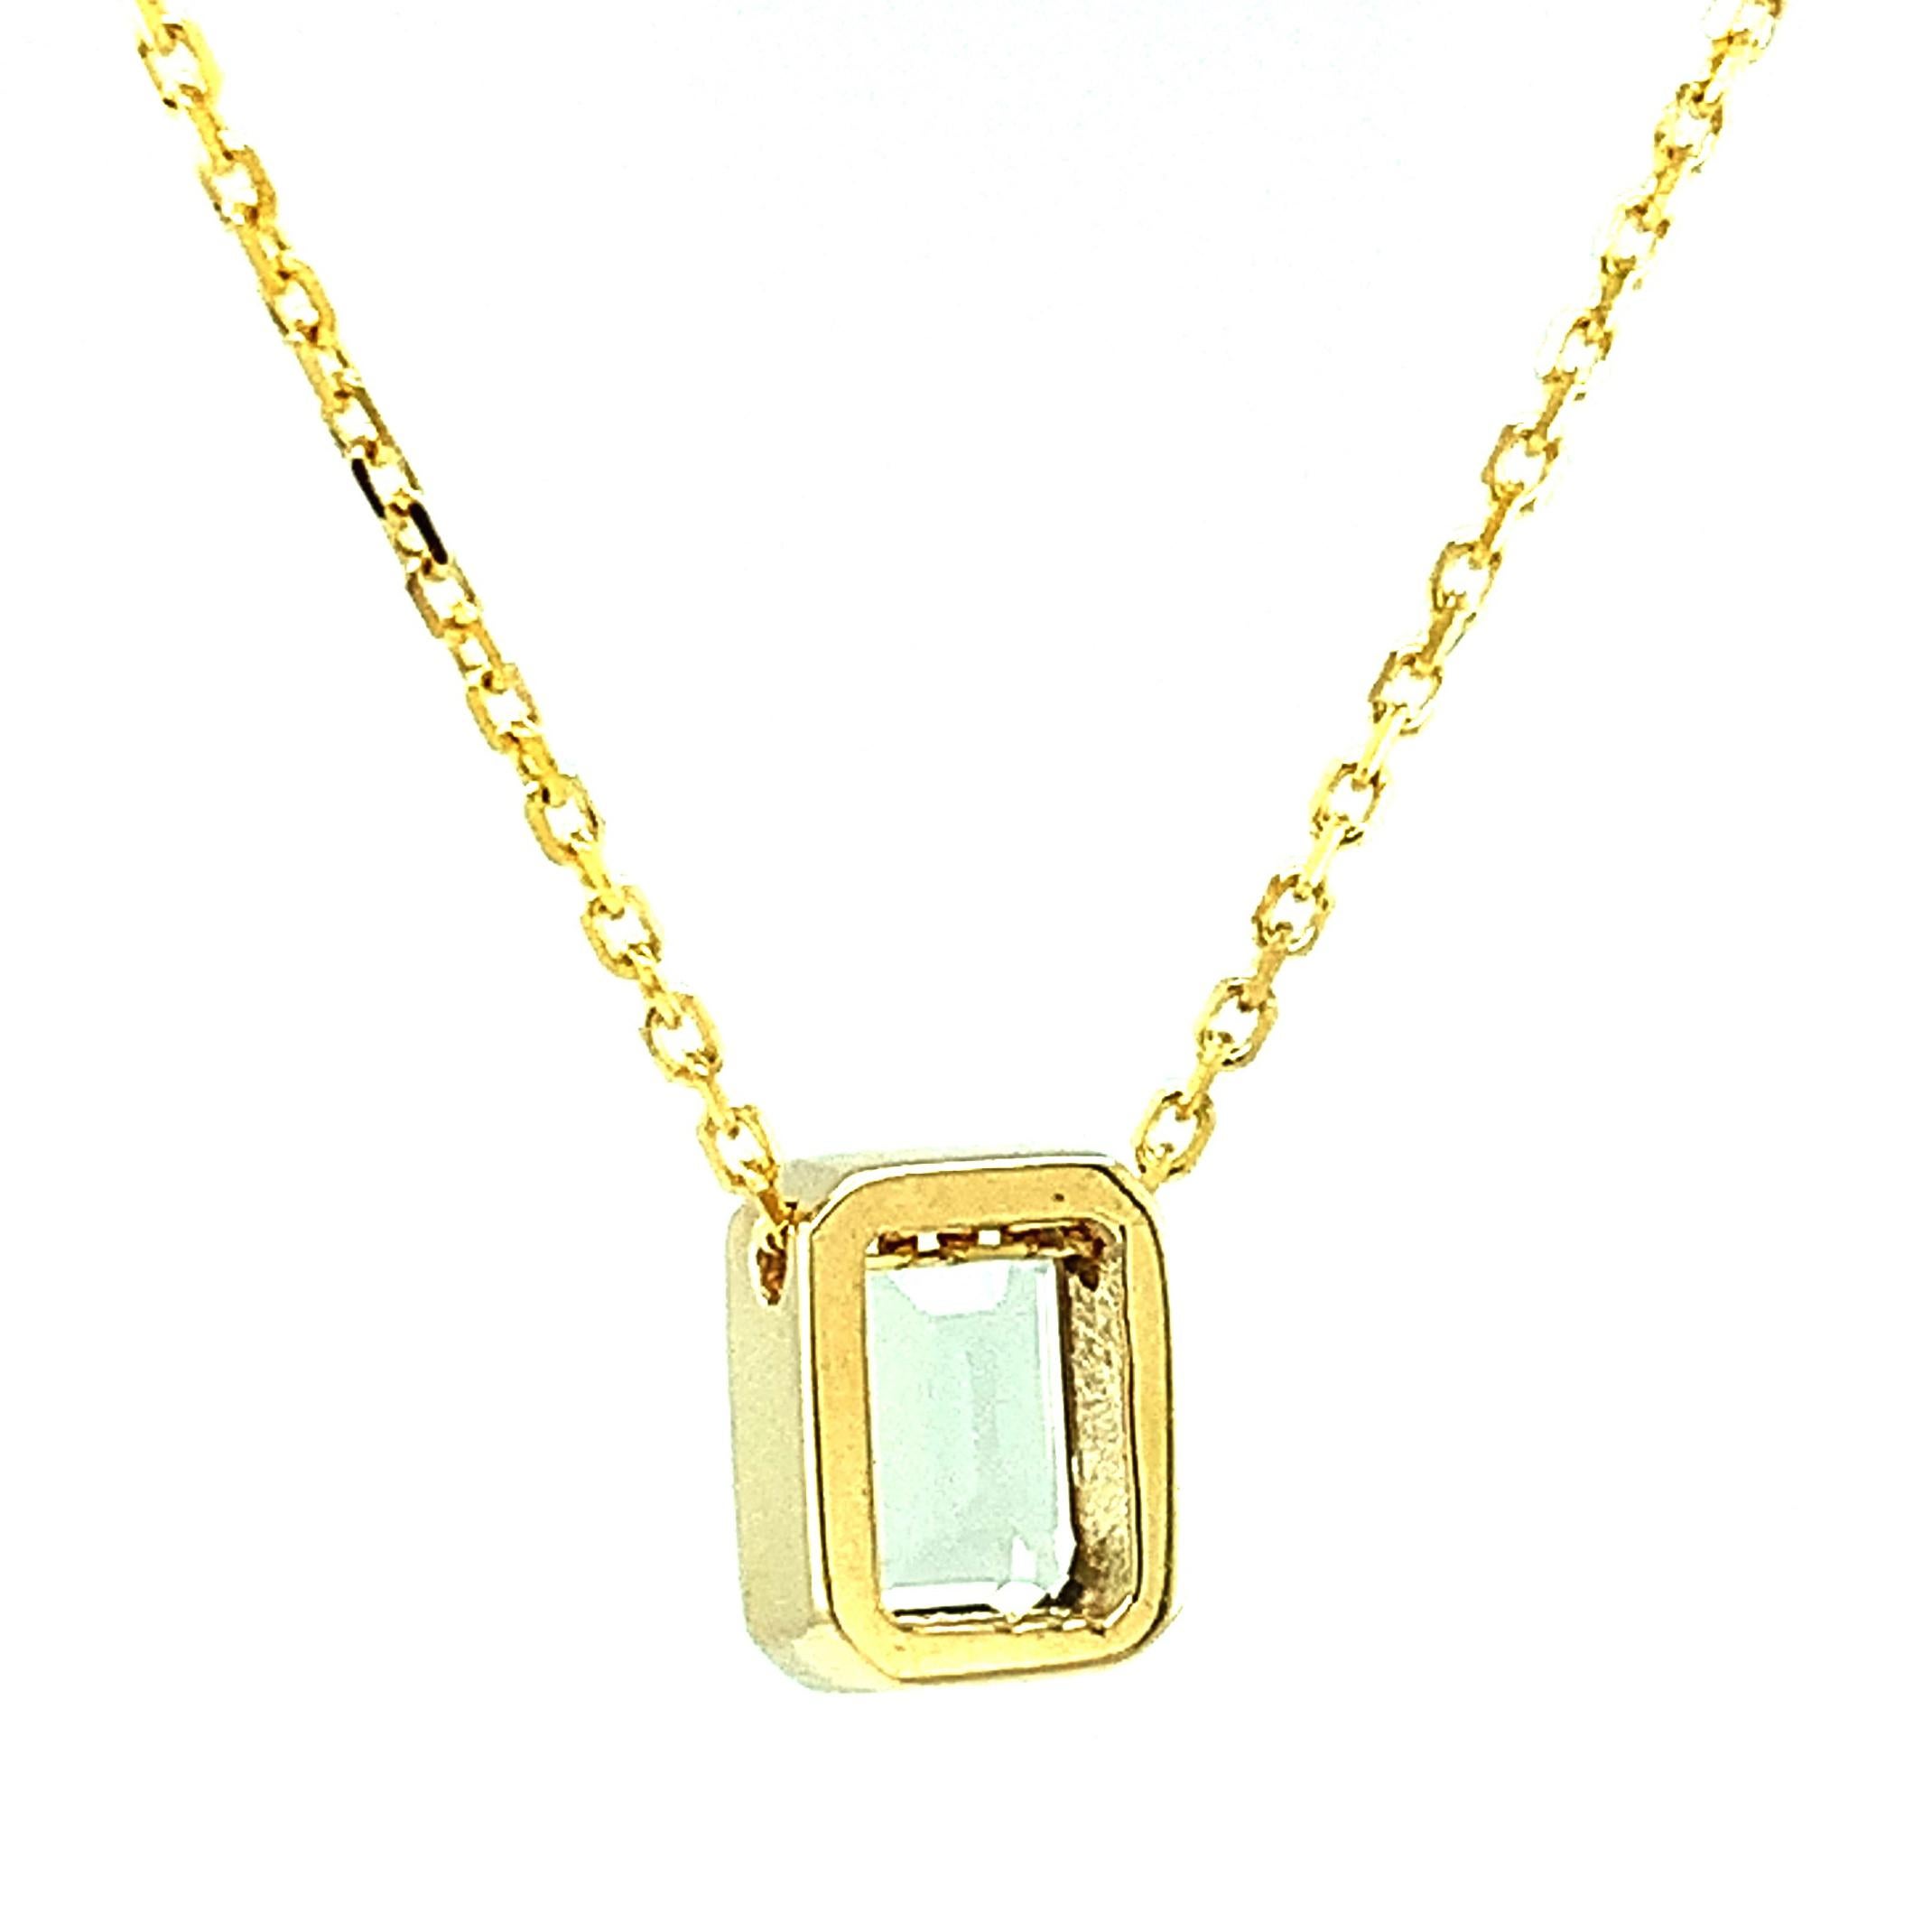 This understated necklace will add a touch of sparkle to any outfit! An unusual pale gray-blue emerald-cut topaz has been set in a shiny 18k yellow gold bezel and hangs from an 18-inch, 18k yellow gold chain. It can be worn alone or layered with